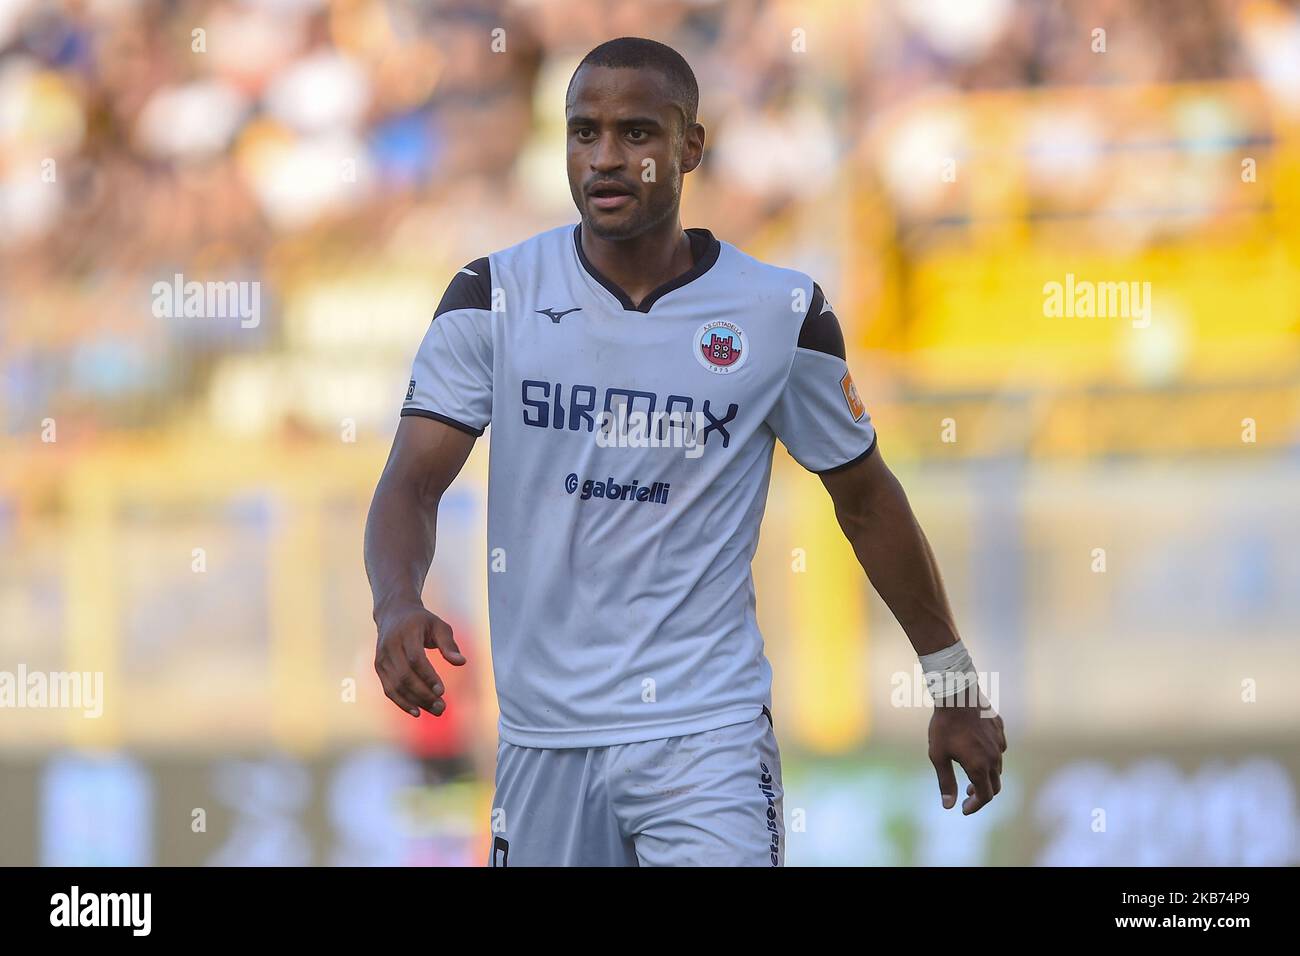 Davide Diaw of AS Cittadella during the Serie B match between Juve Stabia and AS Cittadella at Stadio Romeo Menti Castellammare di Stabia Italy on 28 September 2019. (Photo Franco Romano) Stock Photo